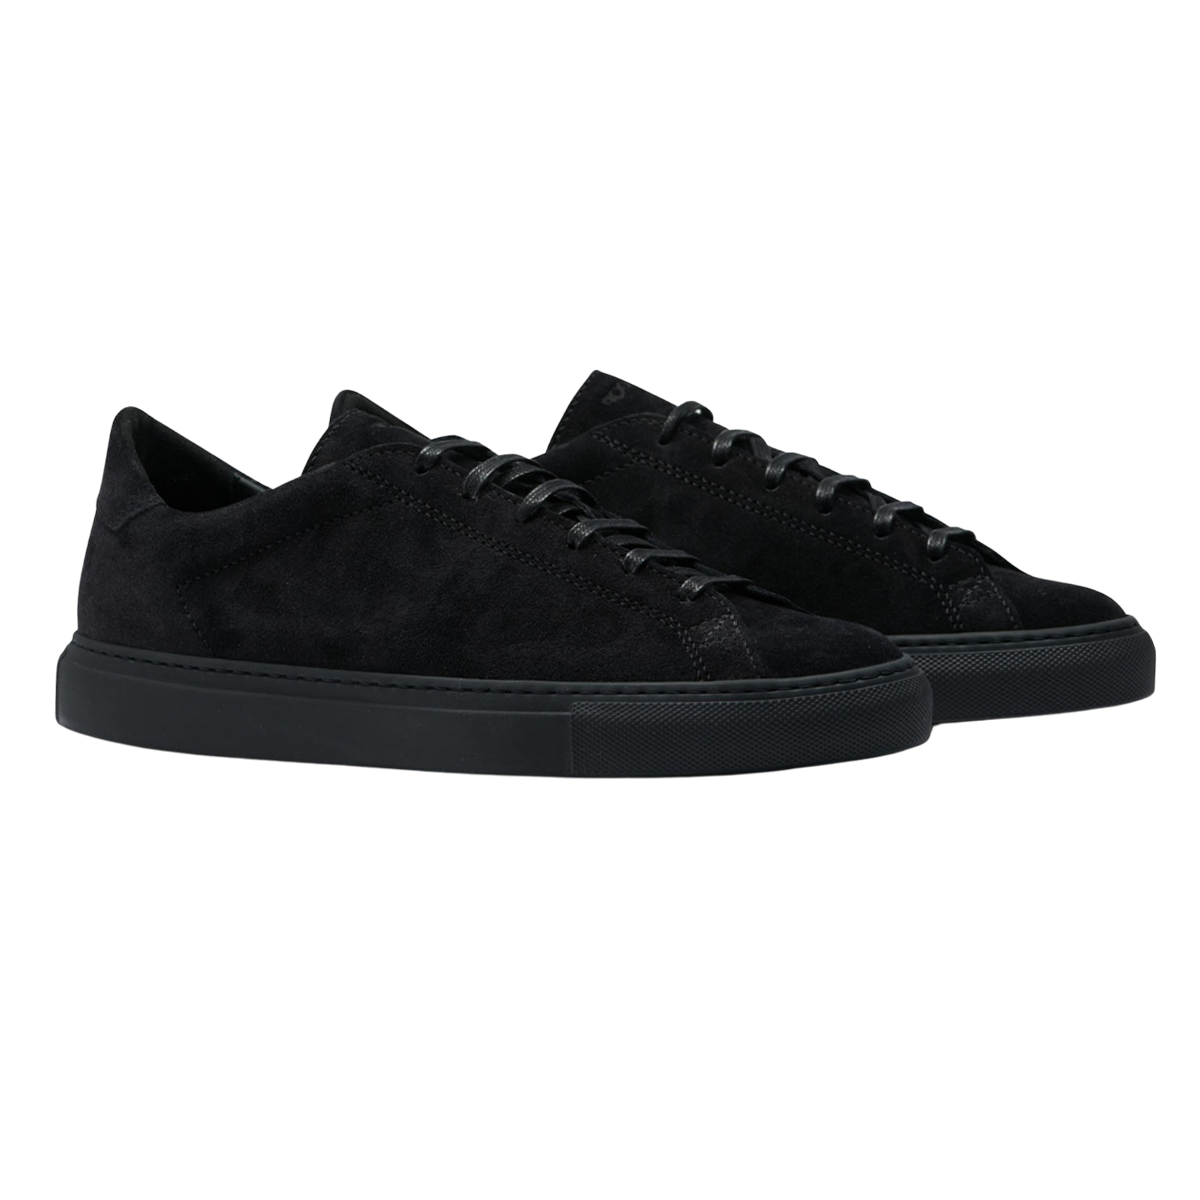 CQP's All Black Suede Racquet Sr Sneakers with arch support and stability on a white background.